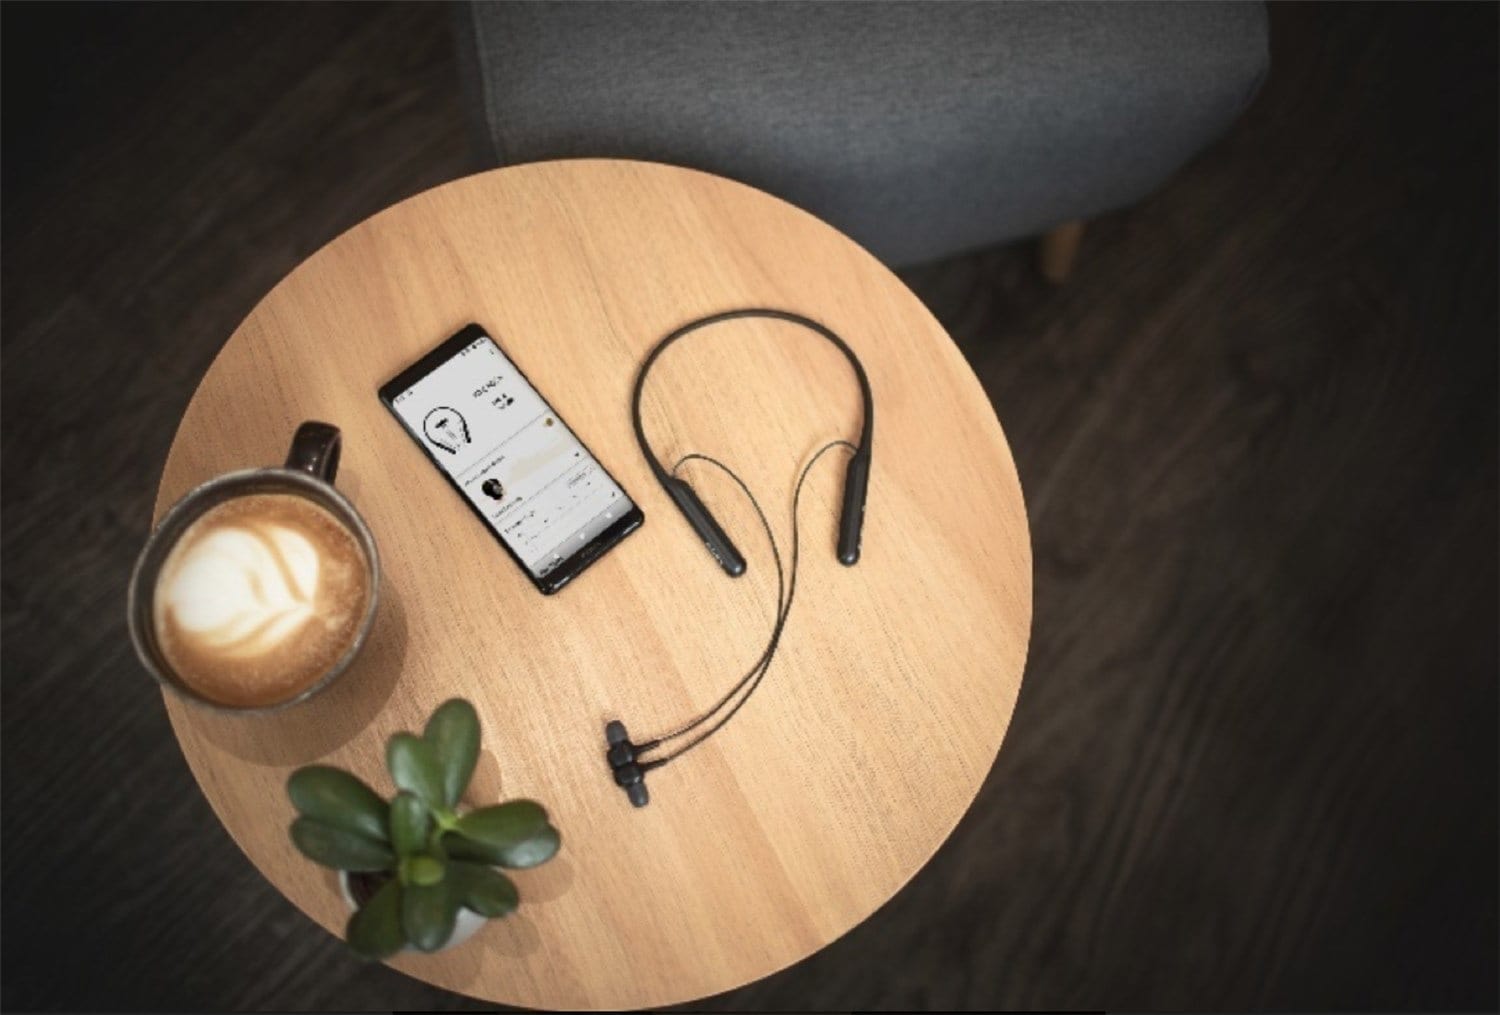 Sony launches a new wireless, noise-cancelling earphones for music lovers